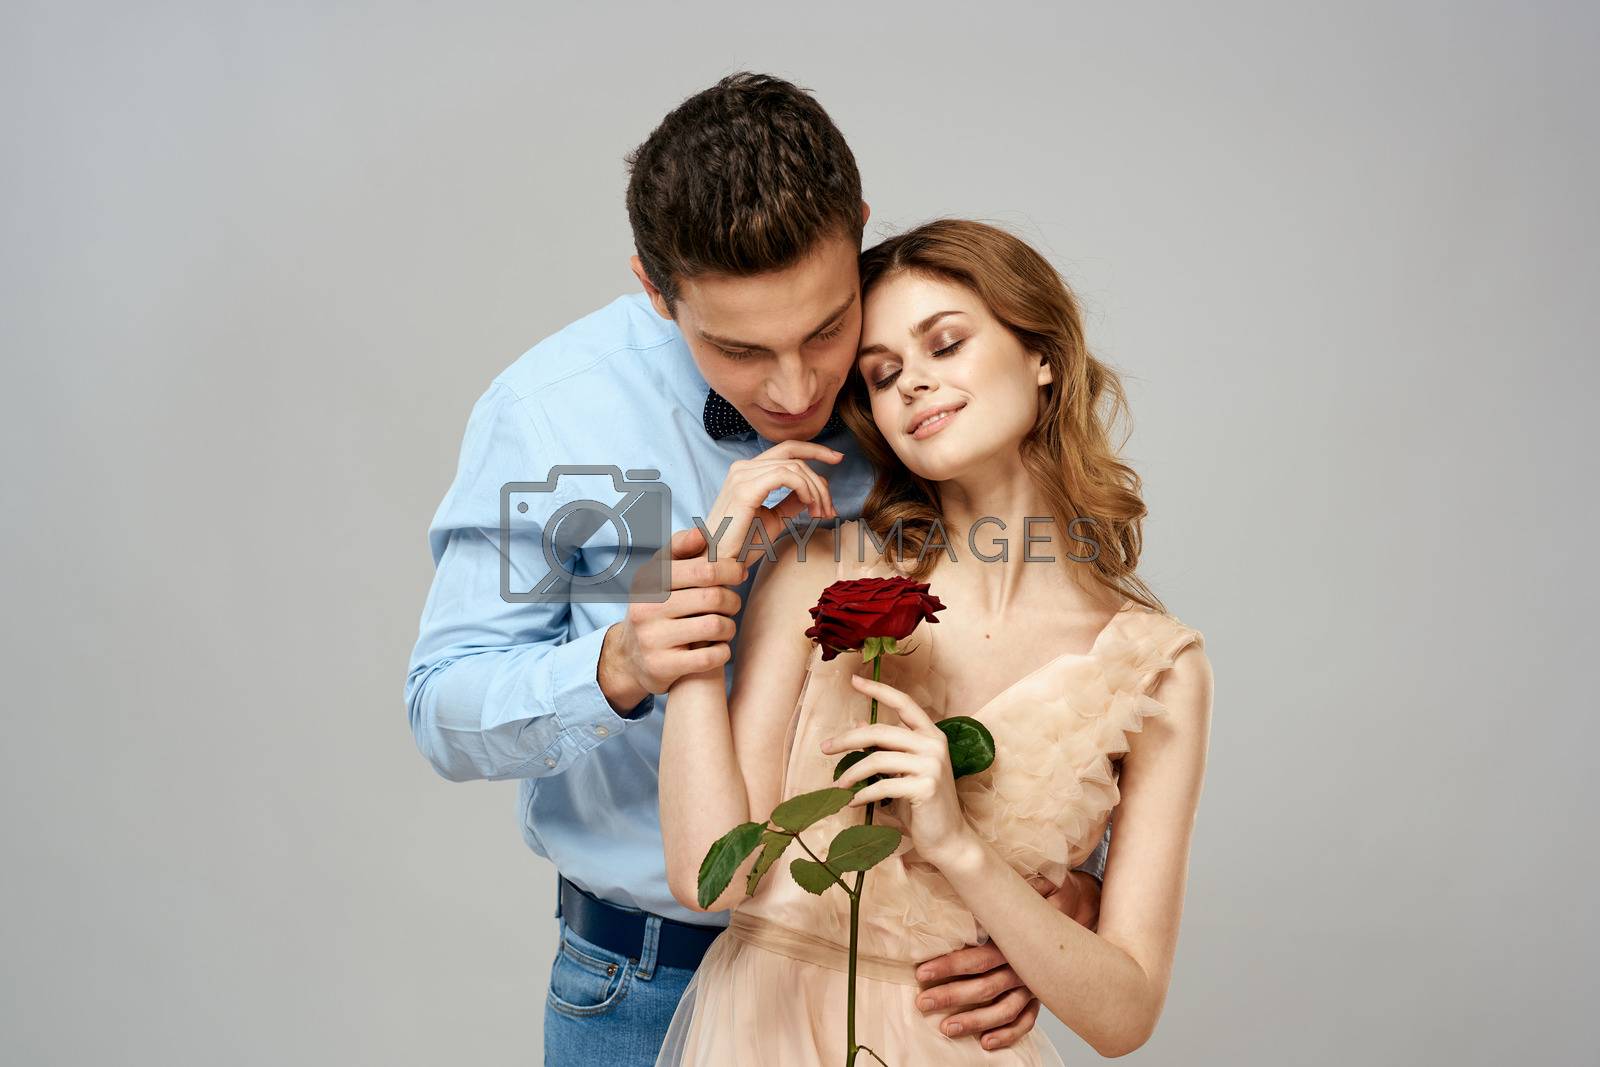 Young couple hugs romance dating lifestyle relationship light background red rose. High quality photo